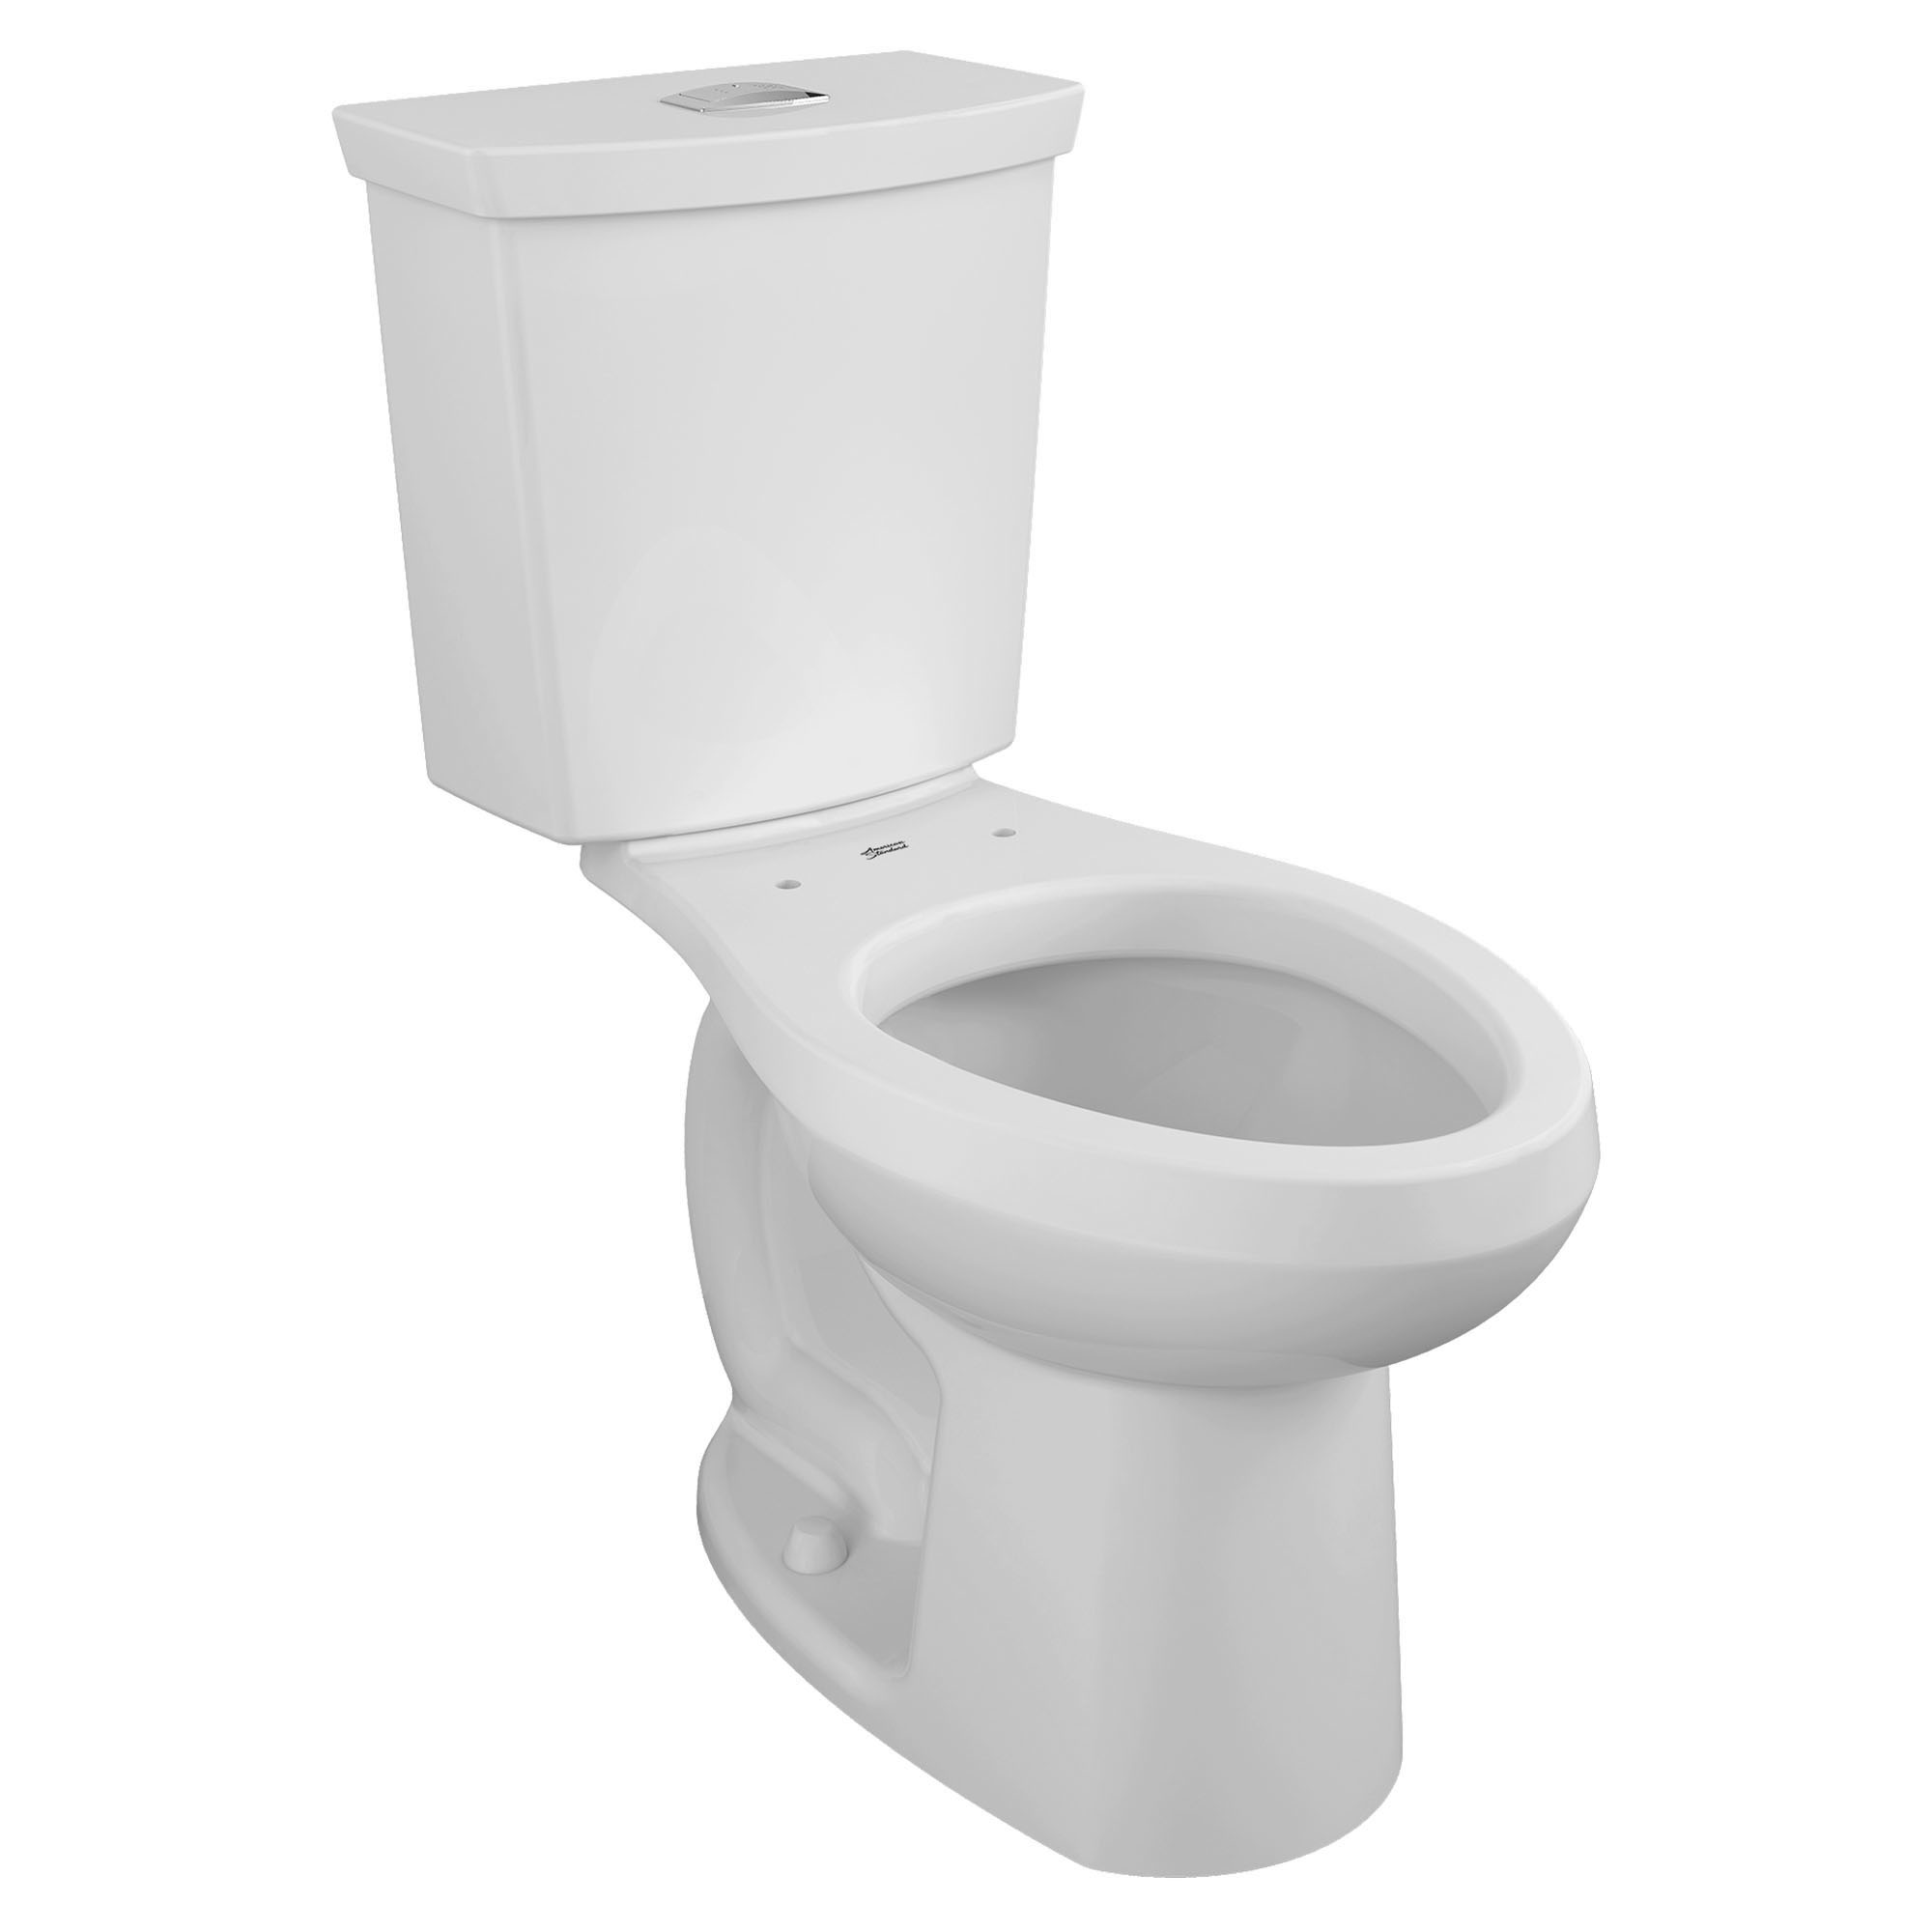 H2Option® Two-Piece Dual Flush 1.28 gpf/4.8 Lpf and 0.92 gpf/3.5 Lpf Chair Height Elongated Toilet Less Seat